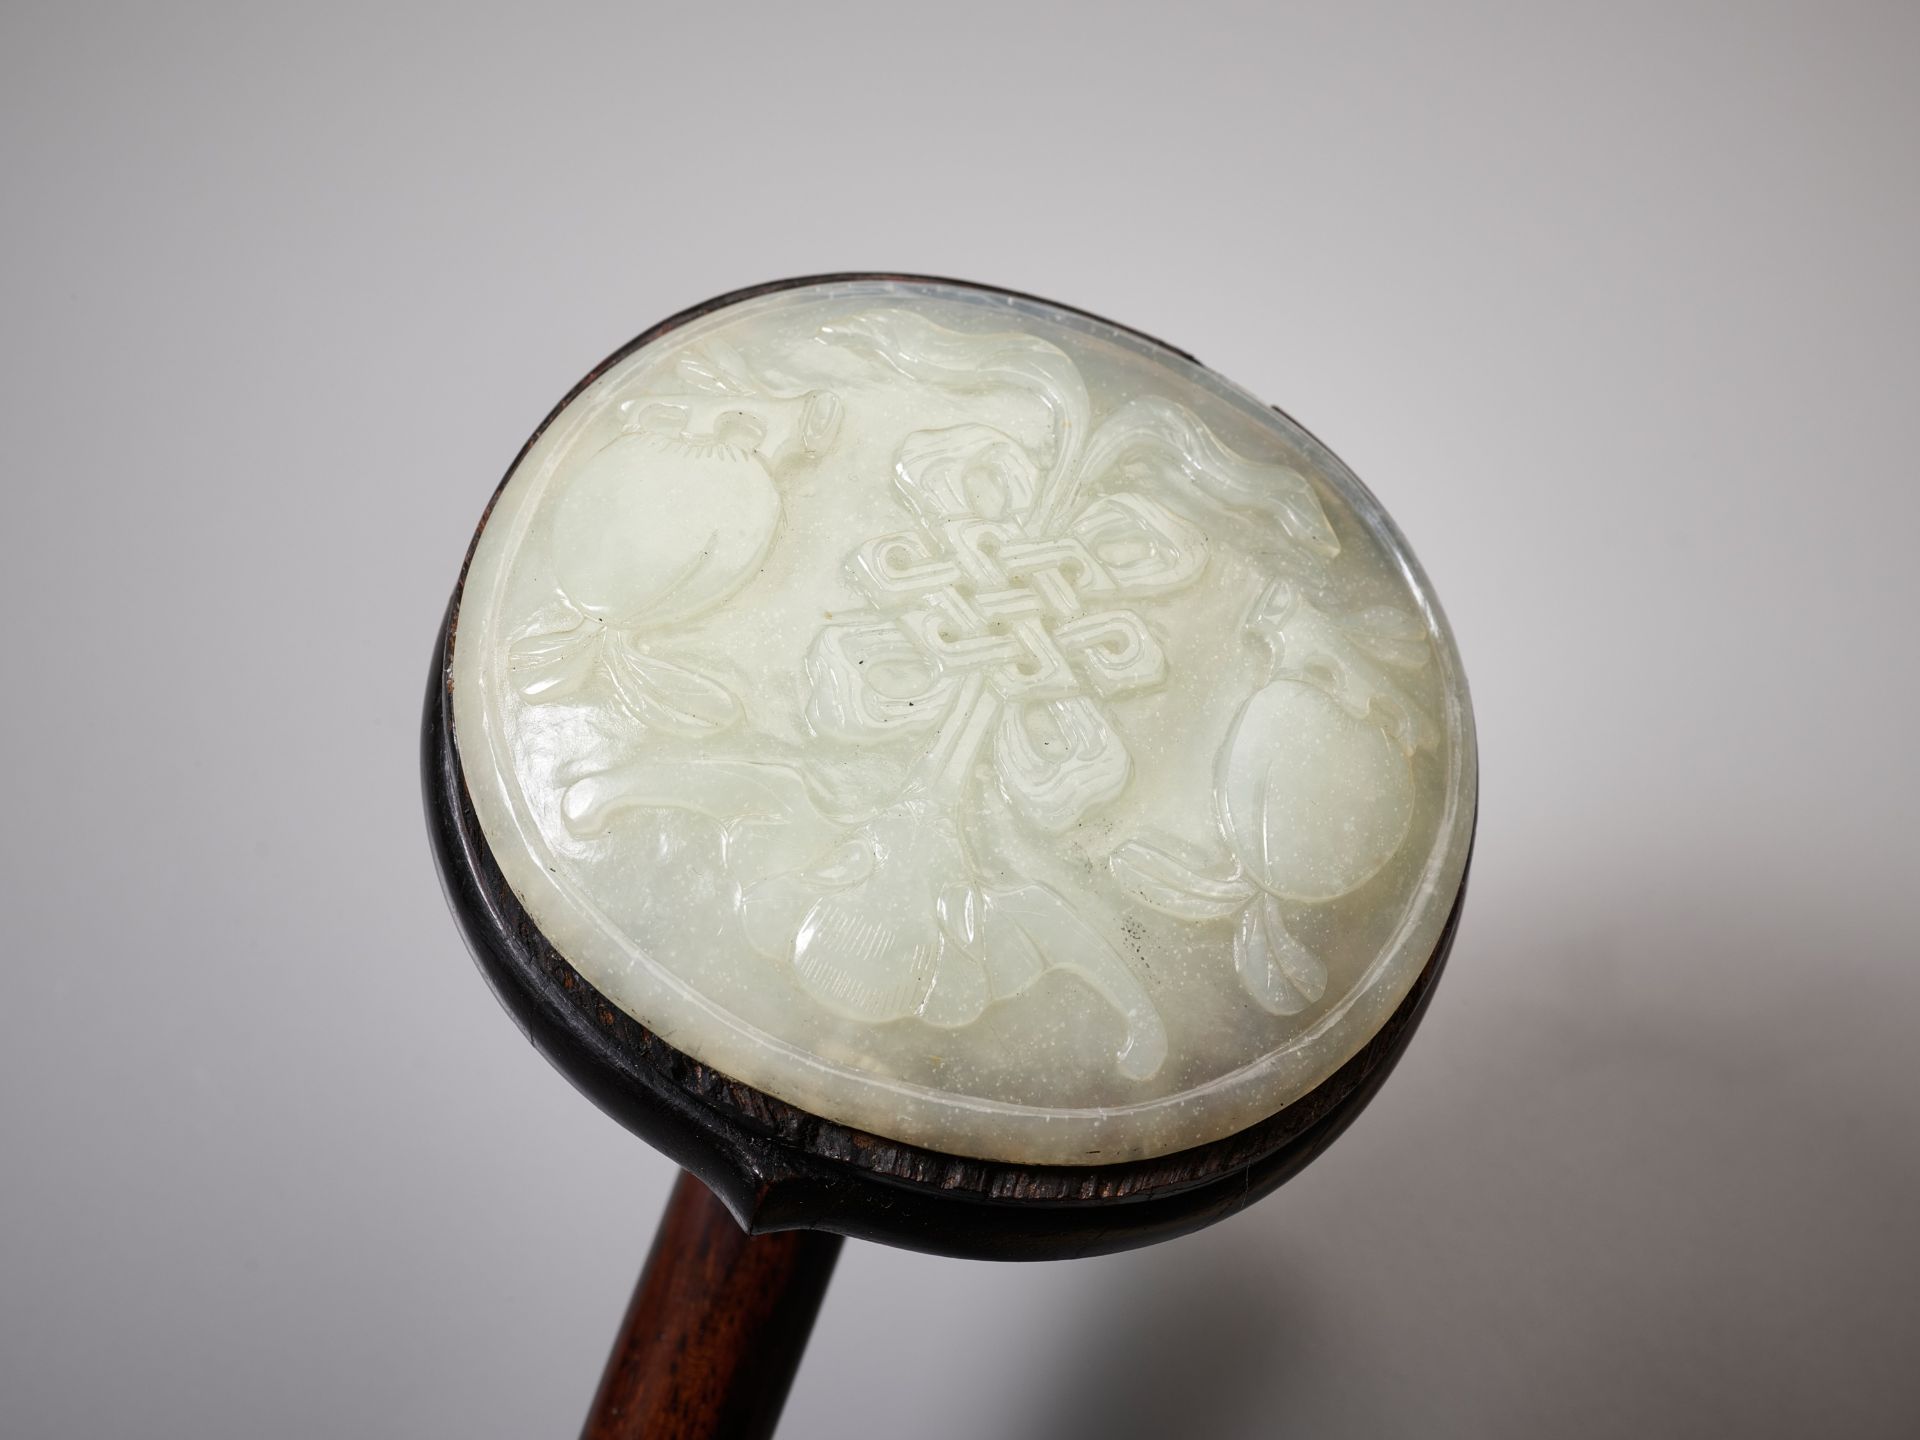 A PALE CELADON JADE-MOUNTED WOOD RUYI SCEPTER, QING DYNASTY - Image 5 of 12